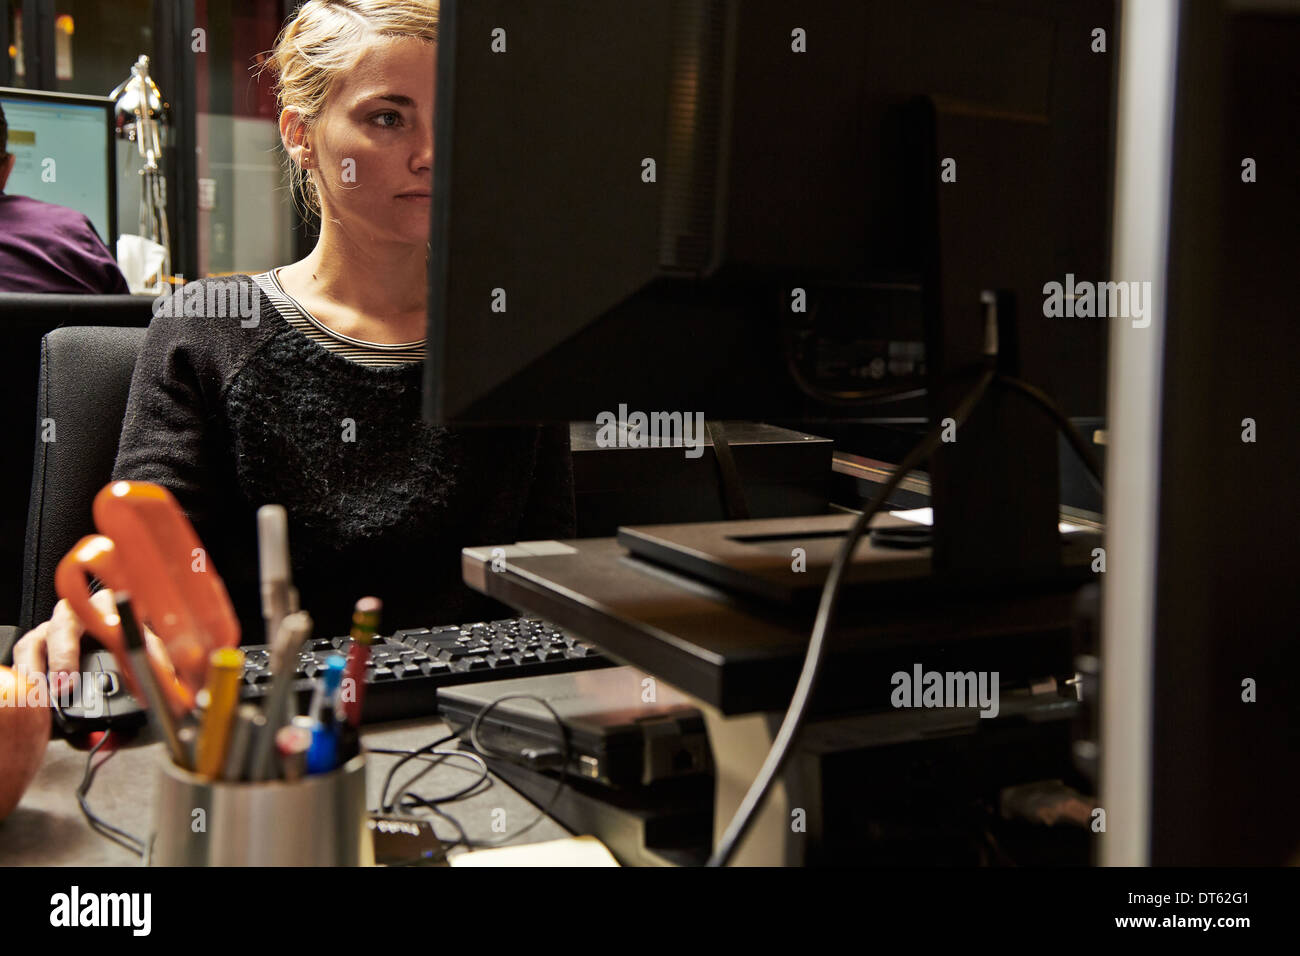 Mid adult woman using computer Banque D'Images